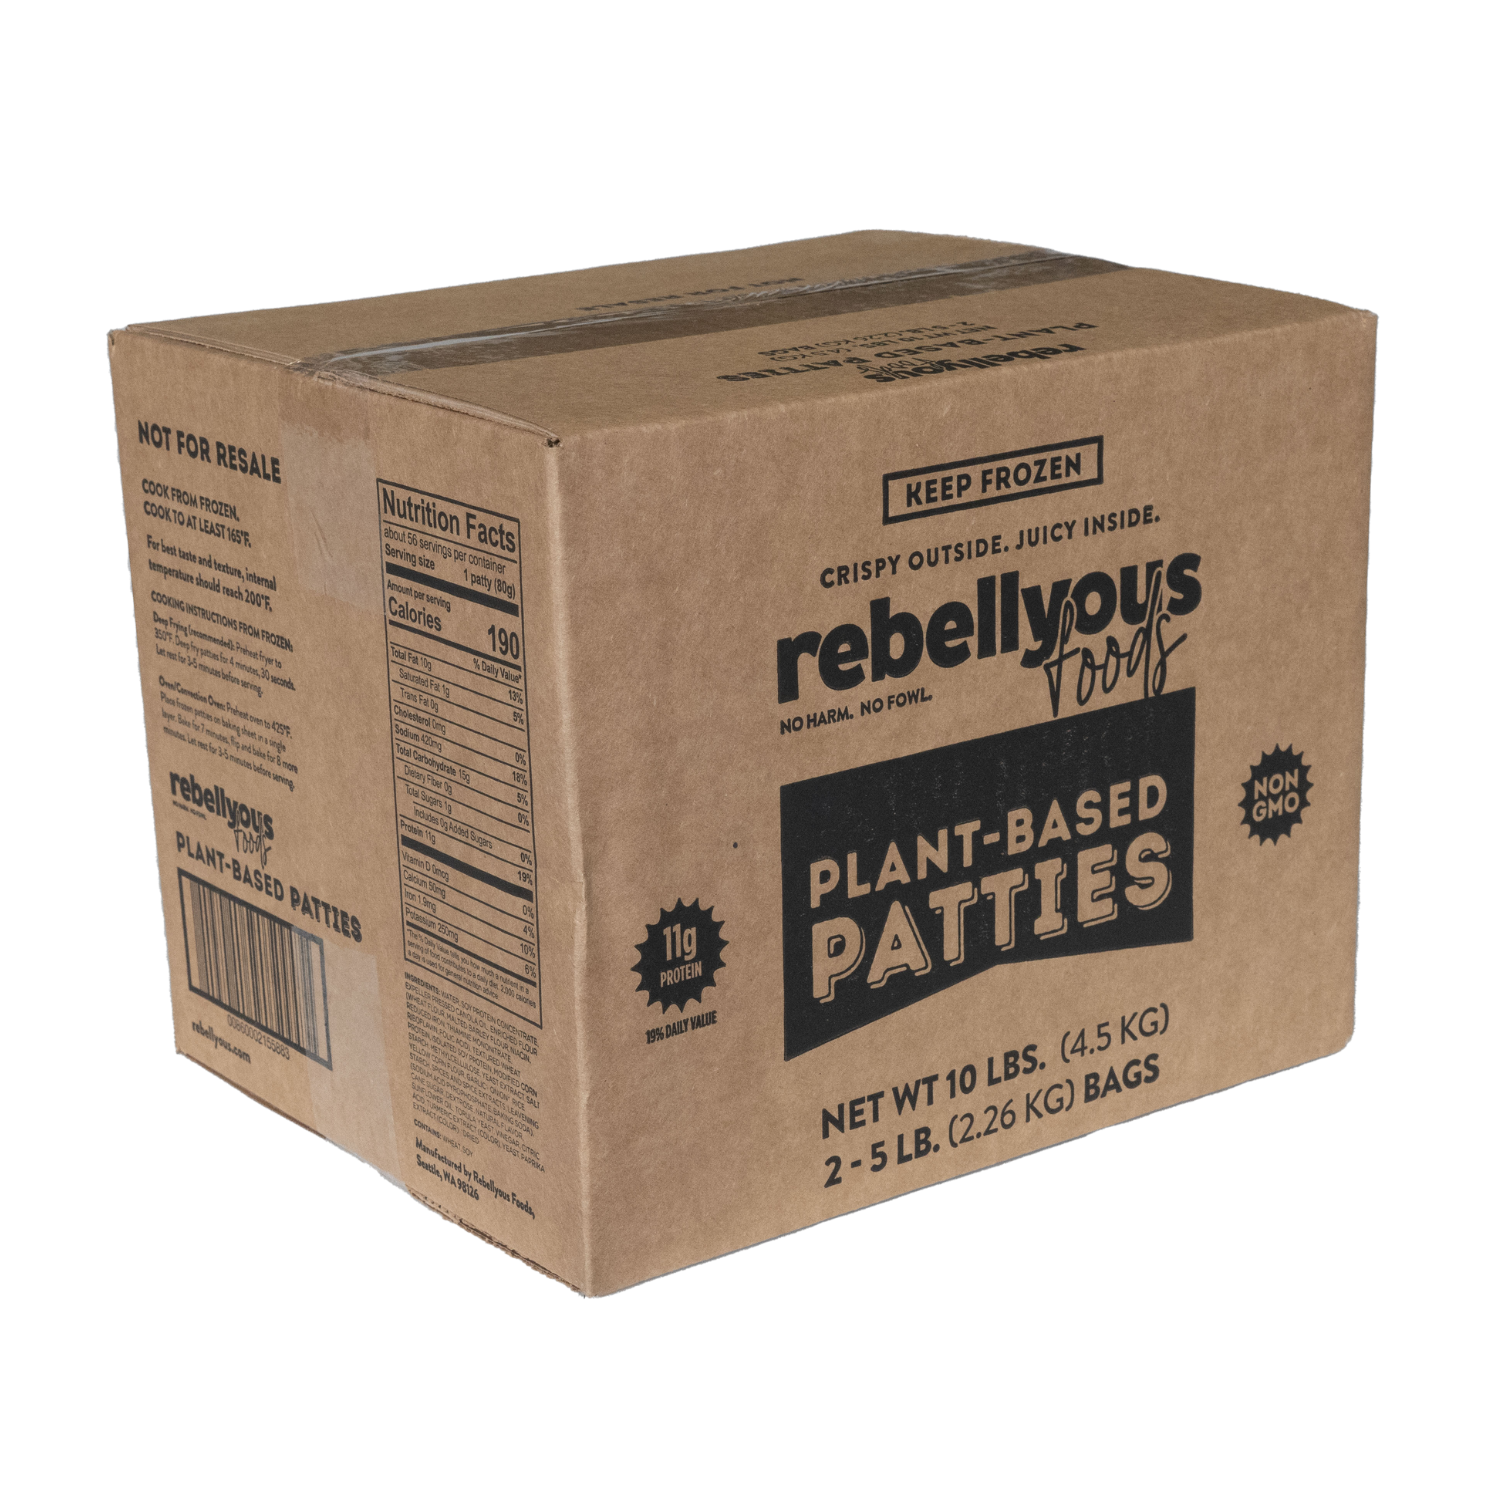 Rebellyous Tenders  (Soy + Wheat) 1 units per case 10.0 lbs